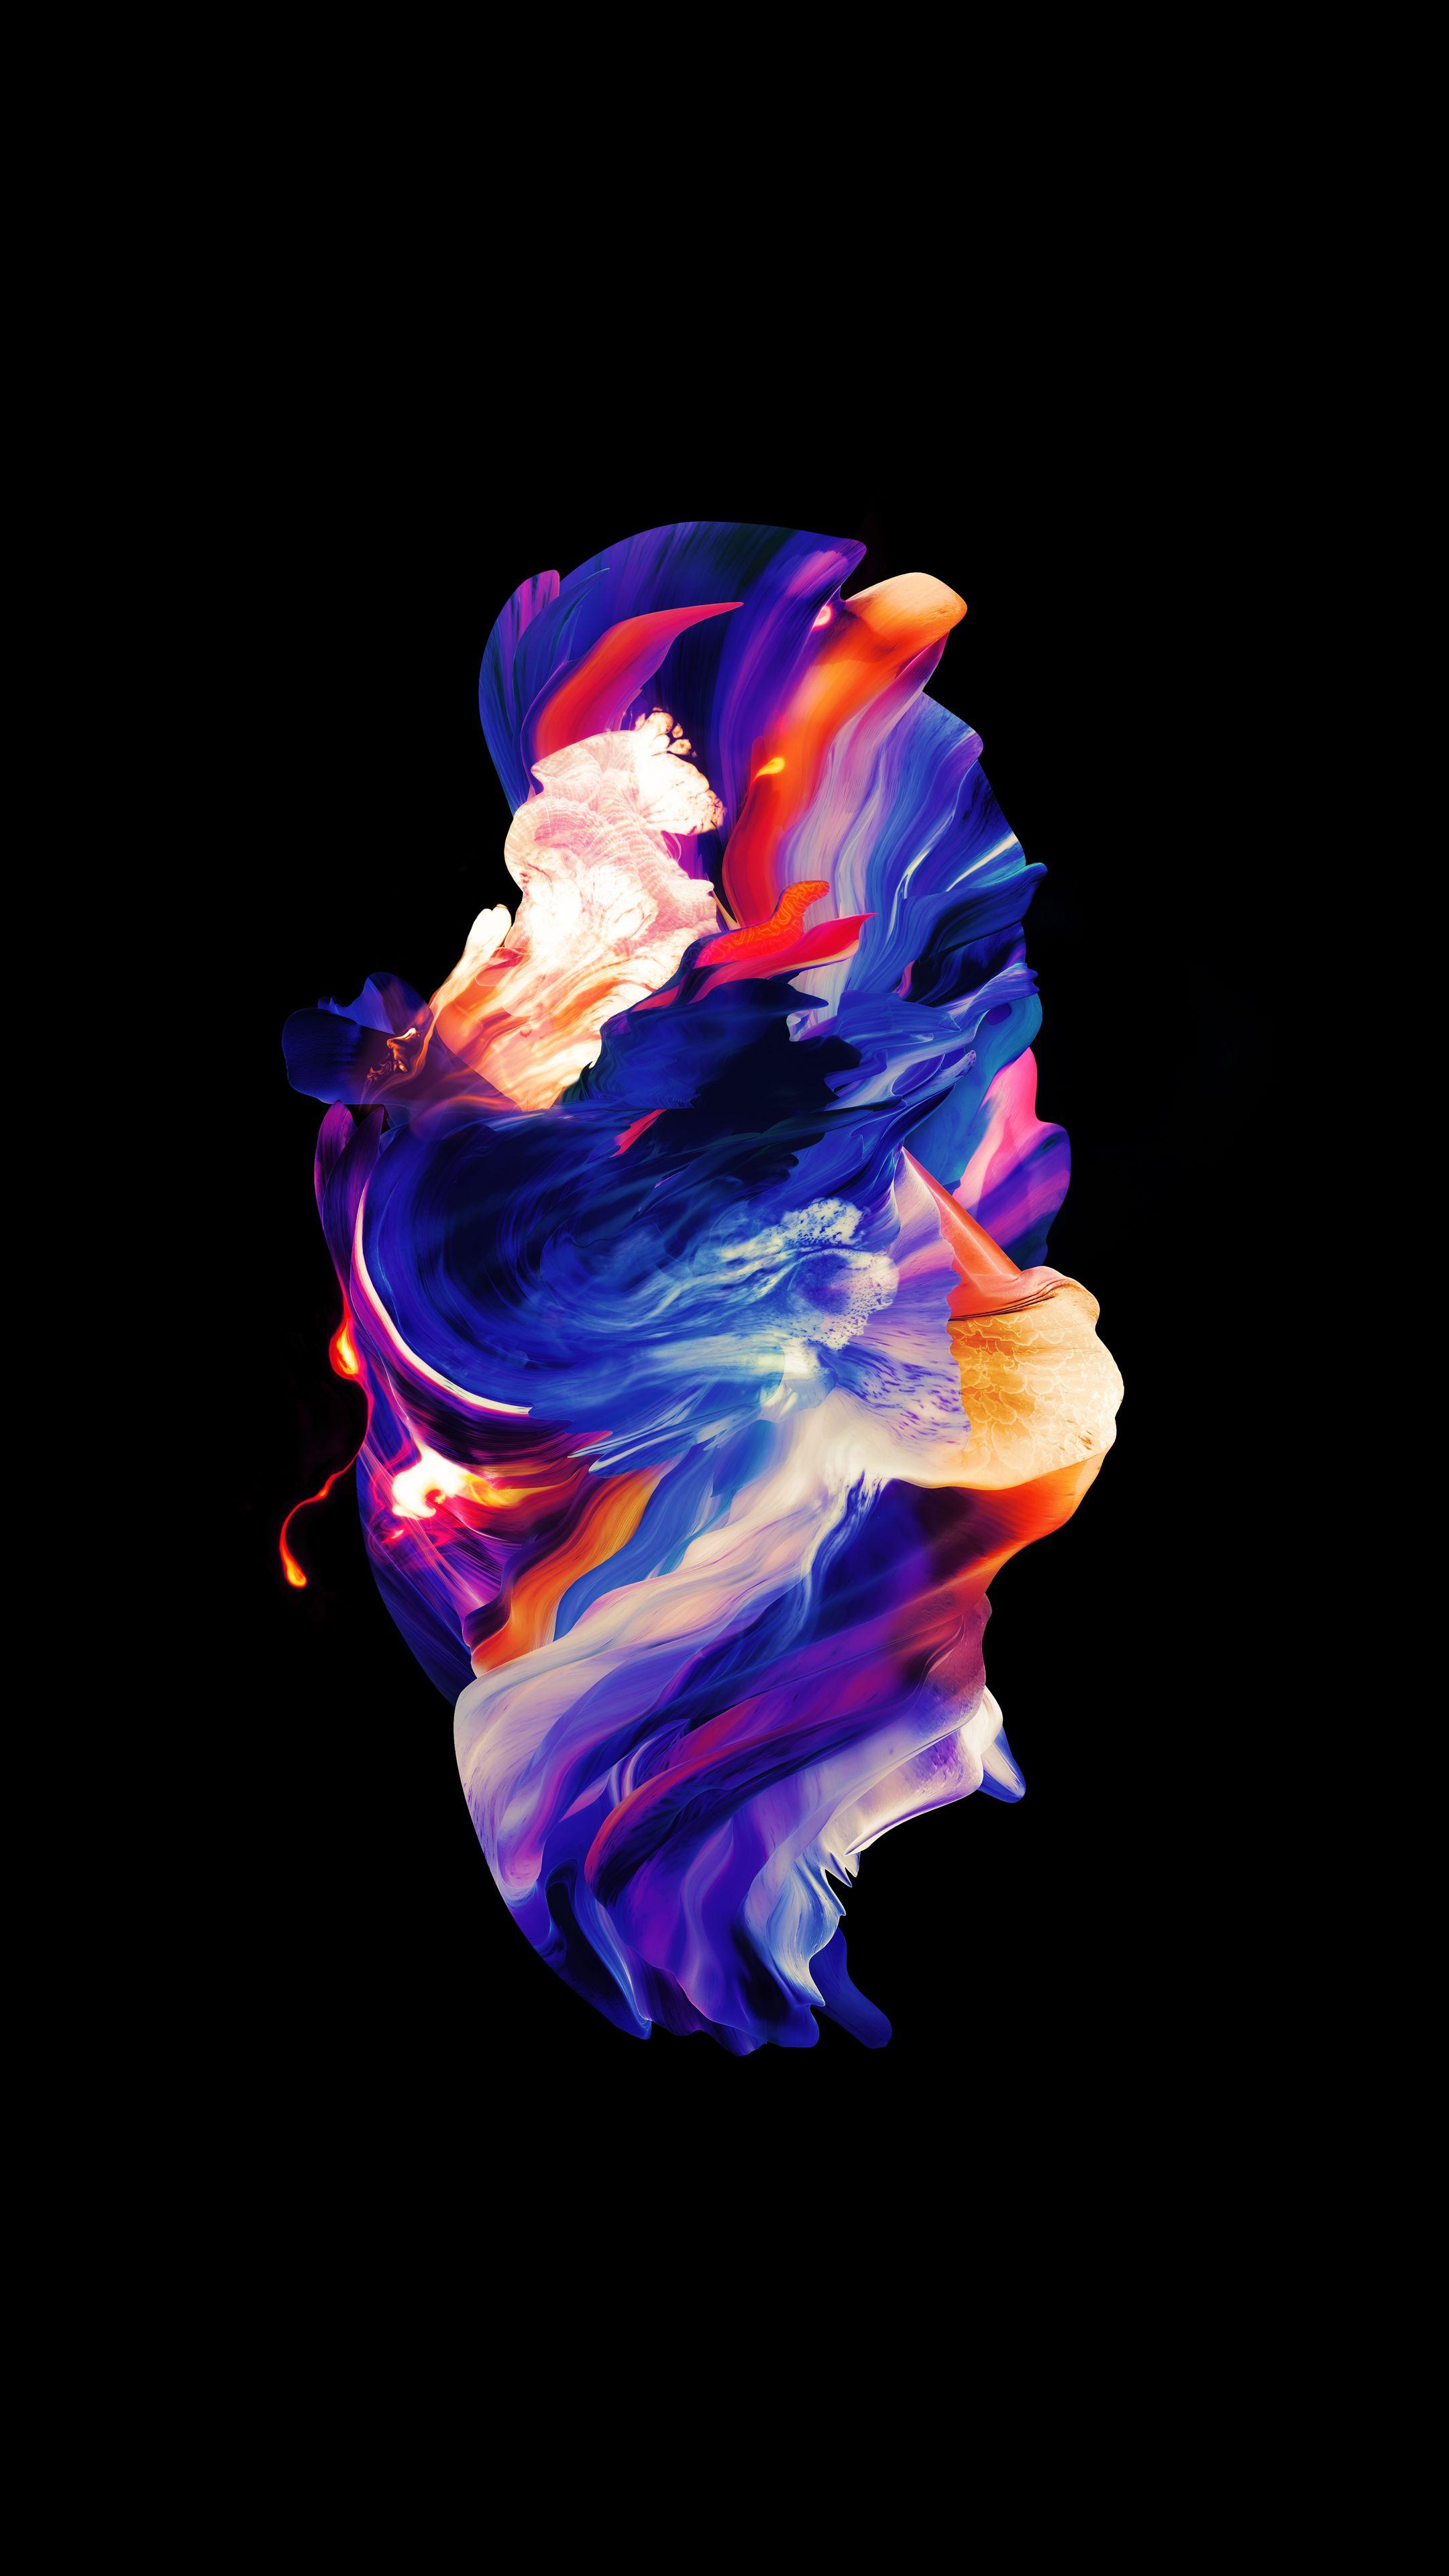 OnePlus 5 Wallpapers